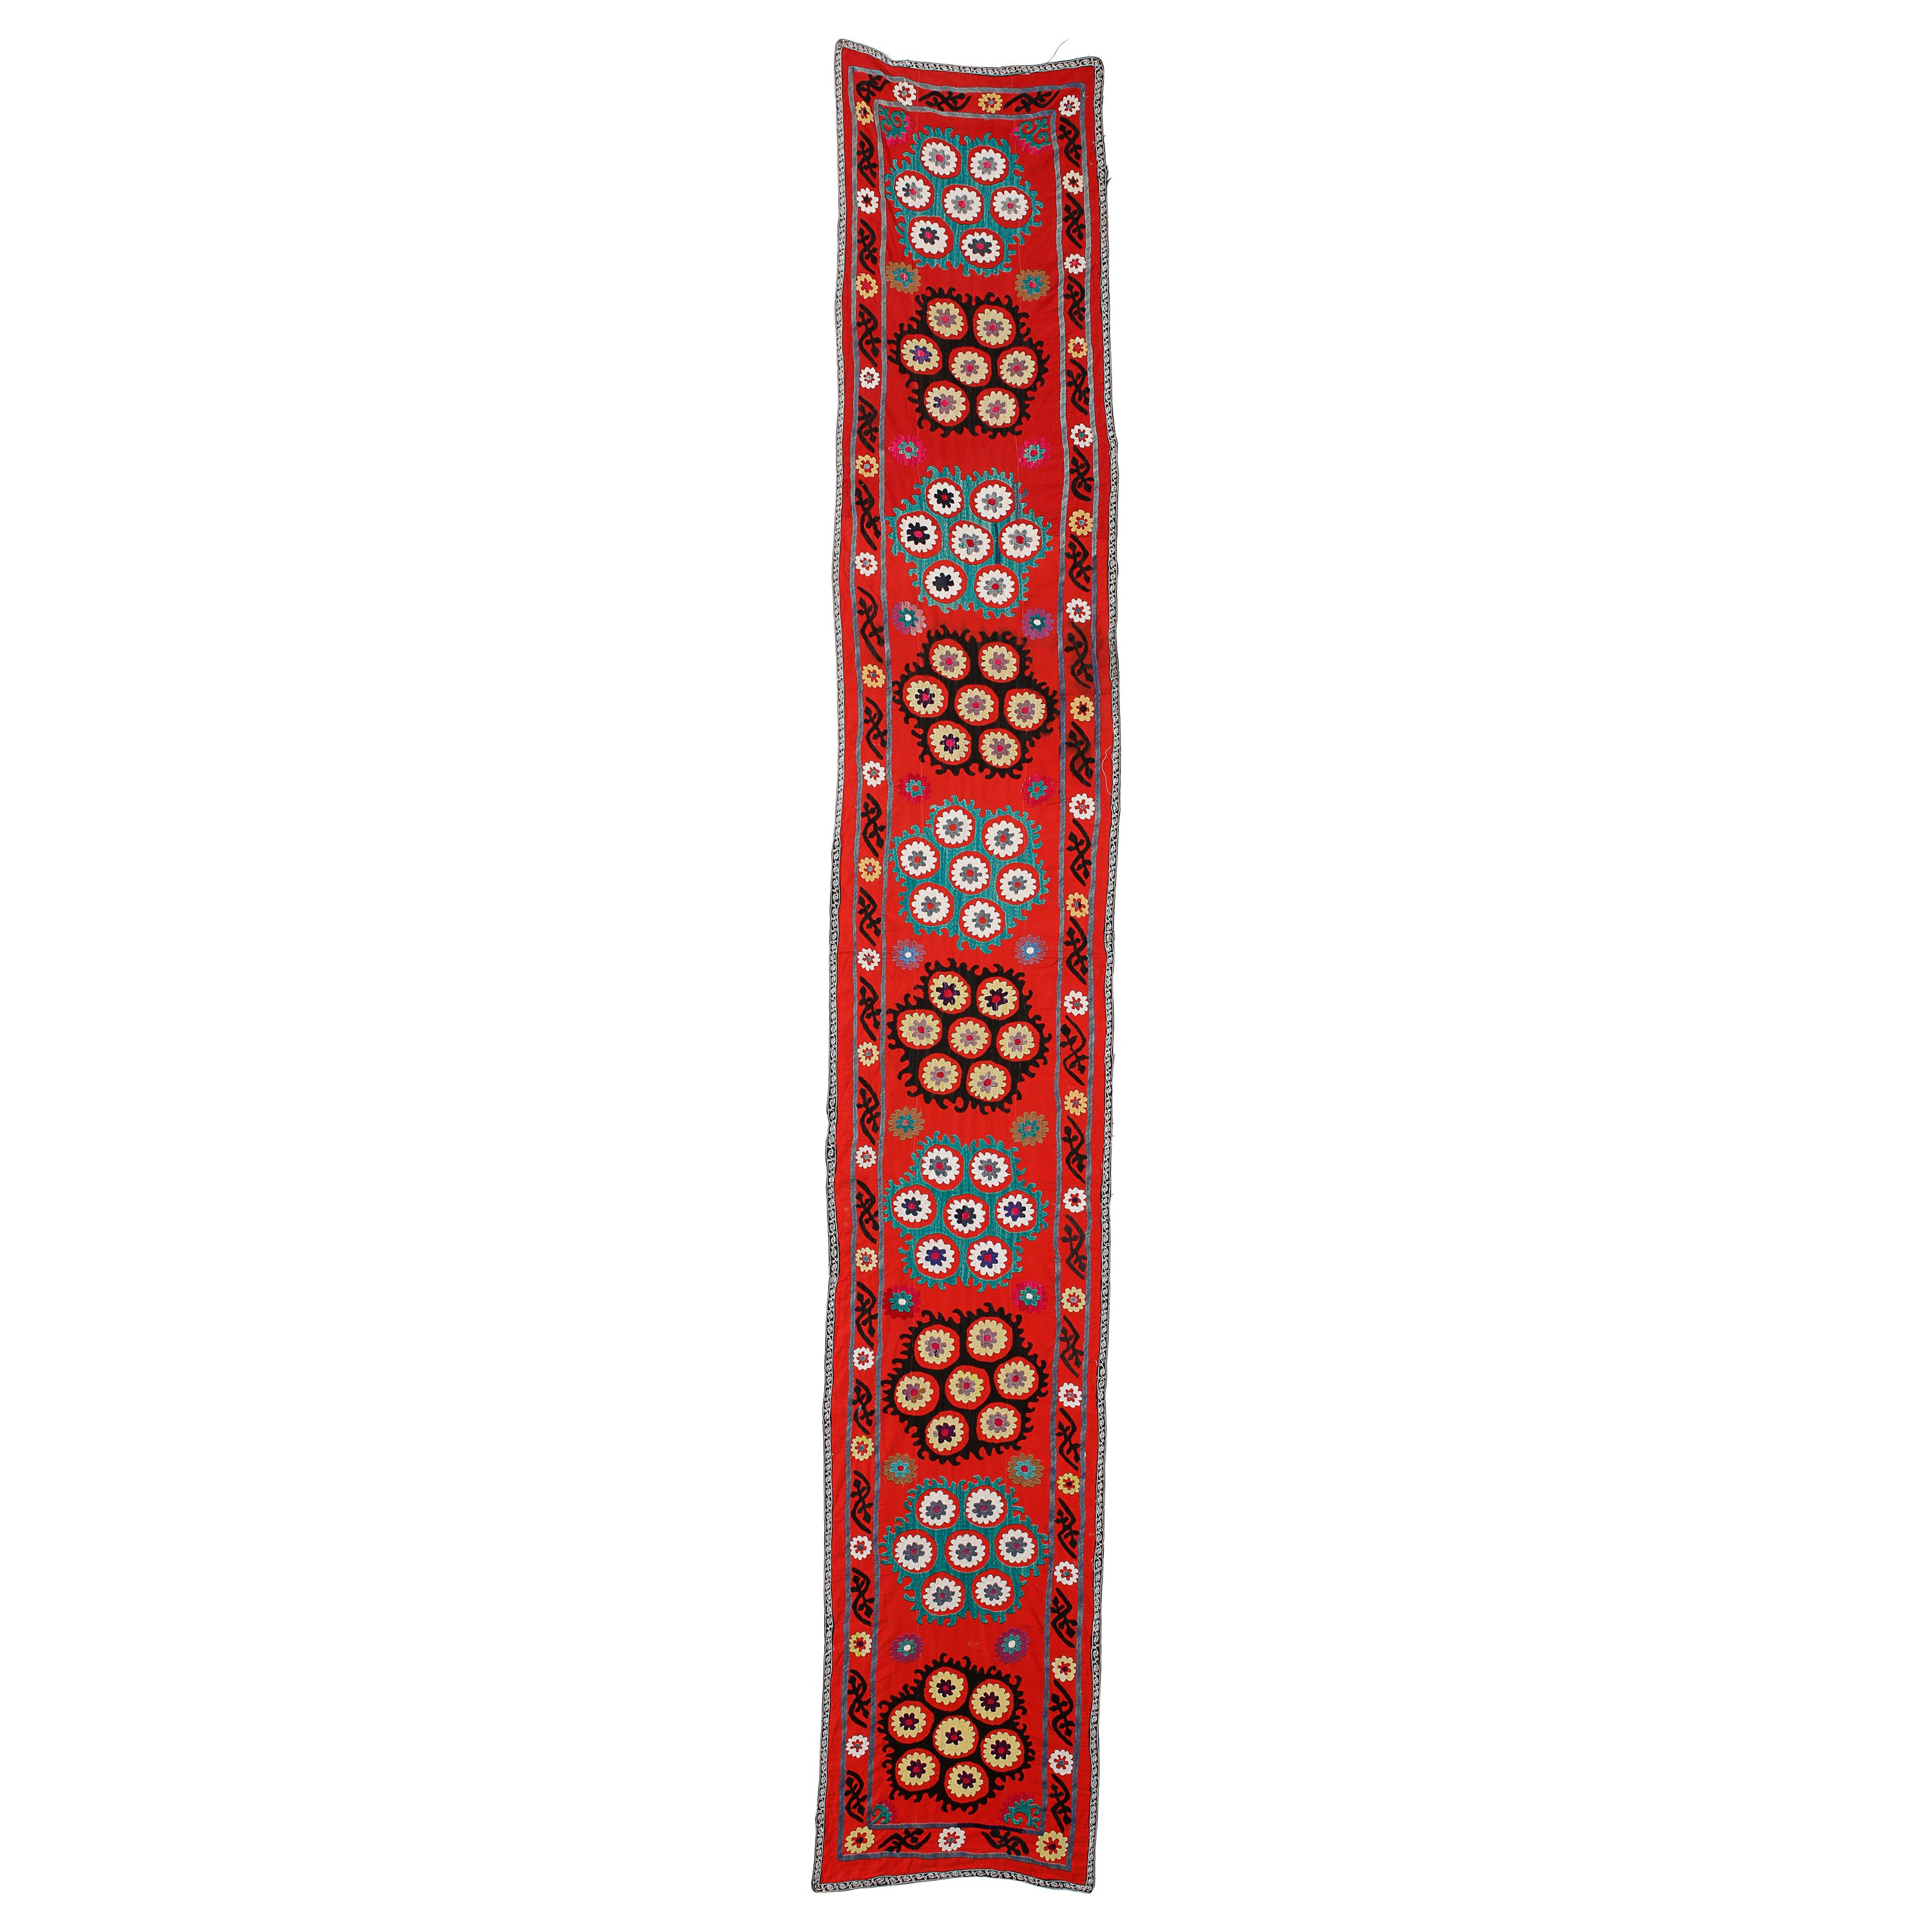 1.9x12.4 ft Silk Embroidery Red Table Runner, Uzbek Suzani Fabric Wall Hanging